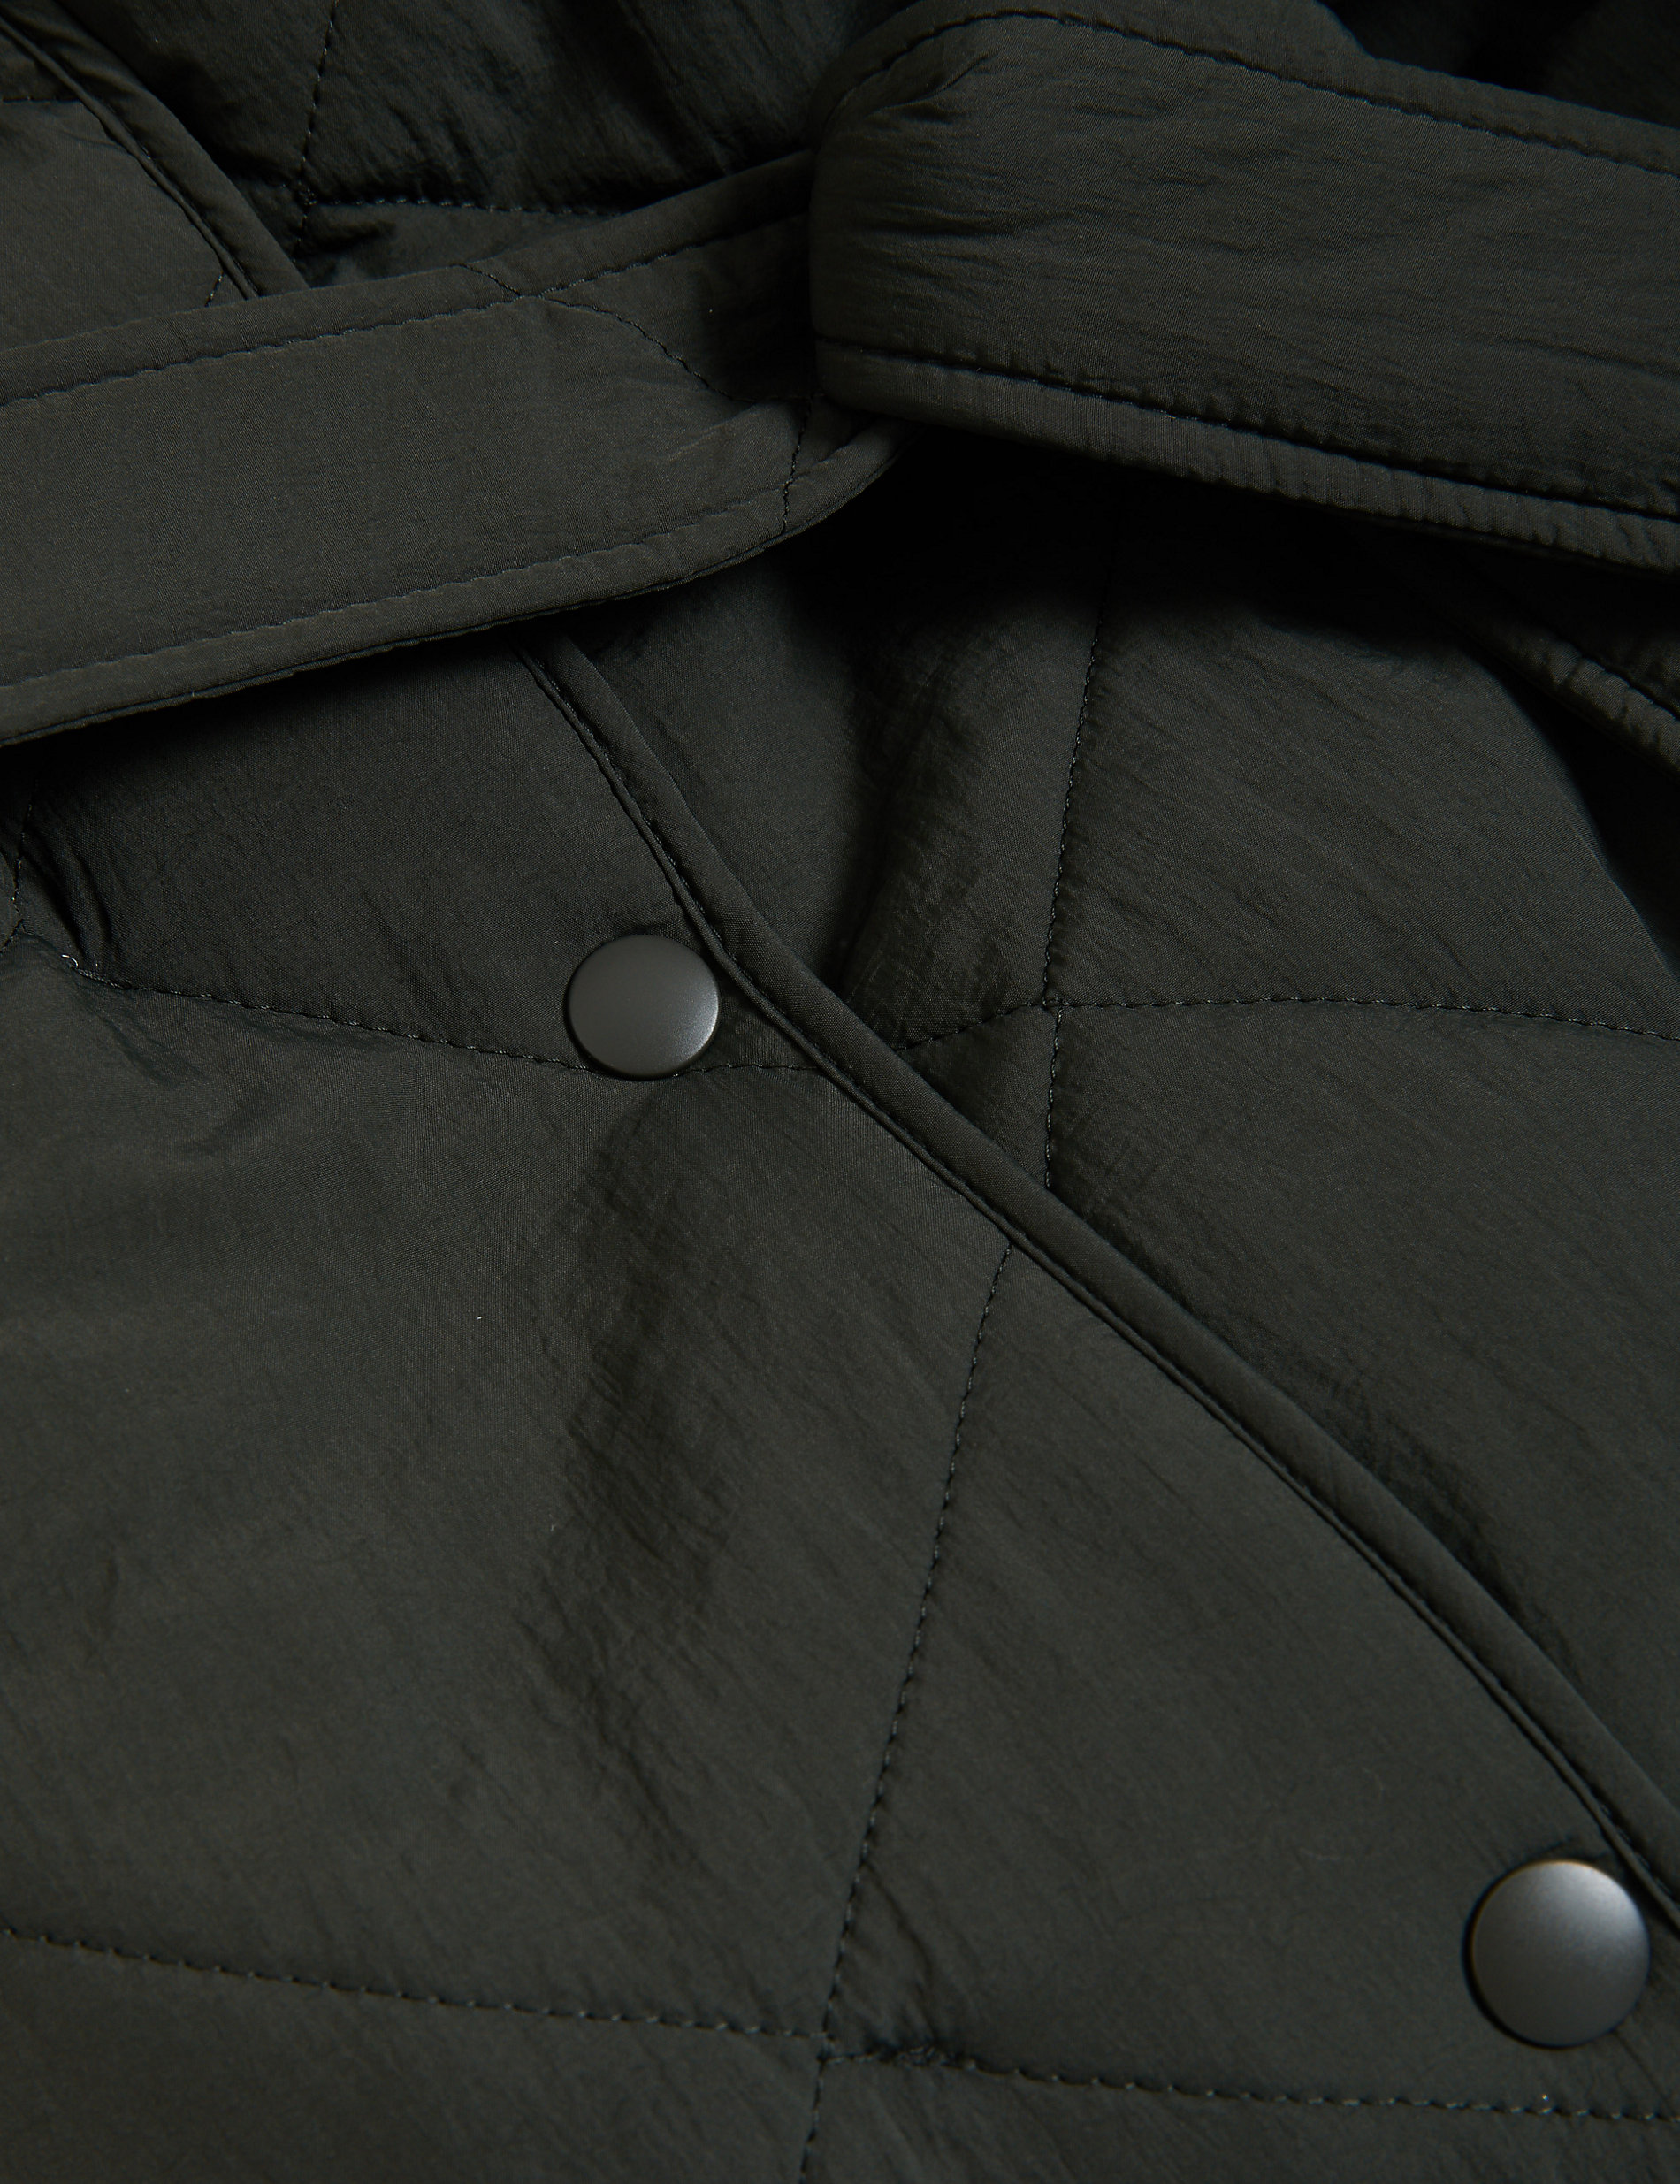 Stormwear™ Textured Quilted Puffer Coat